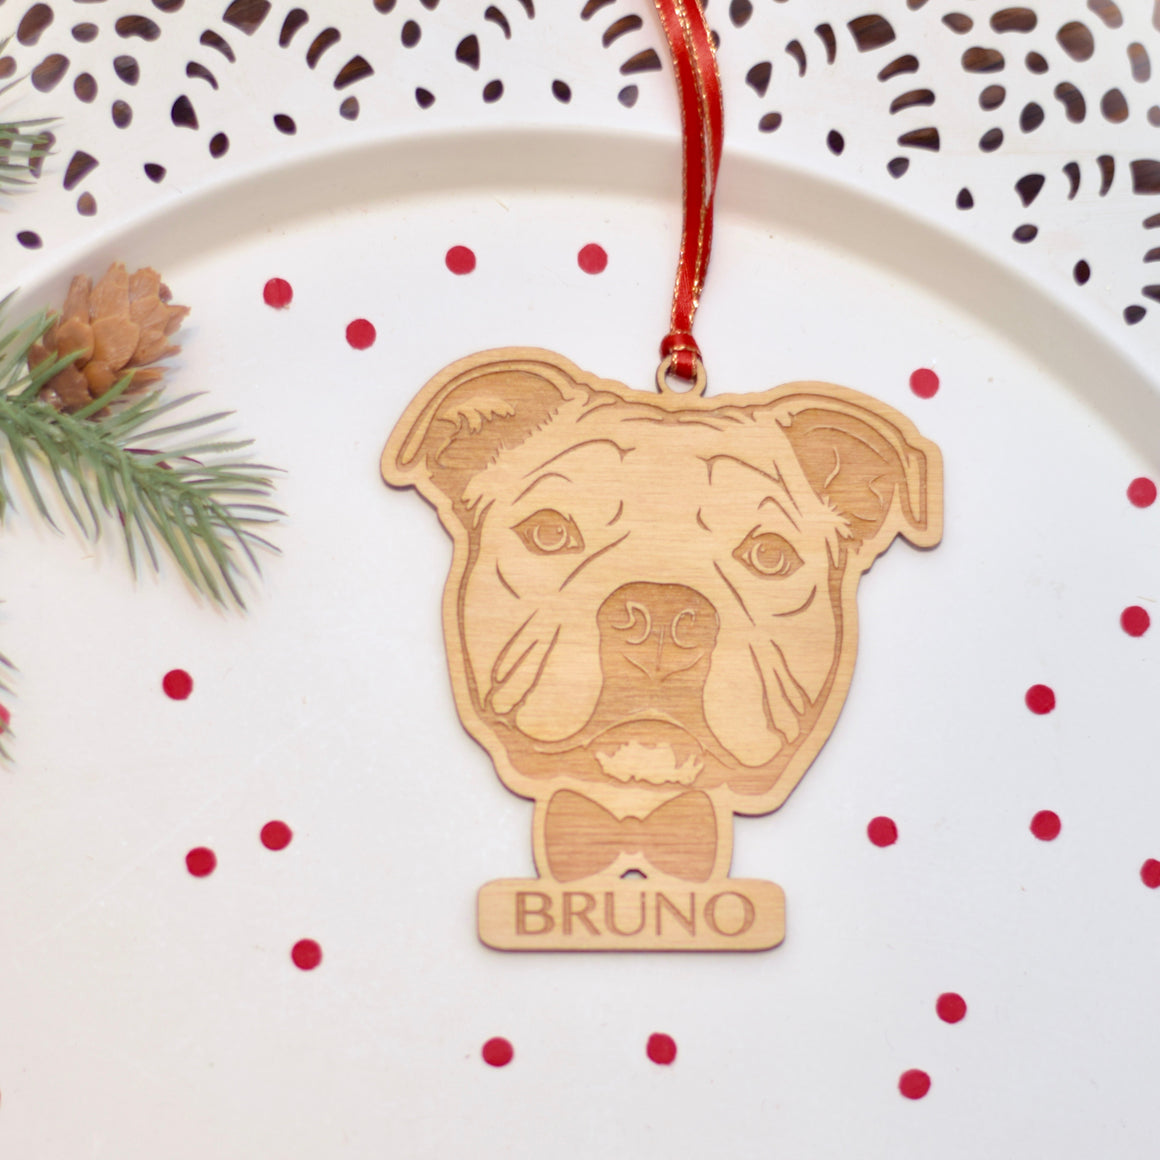 French bully ornament on a cake plate with red confetti